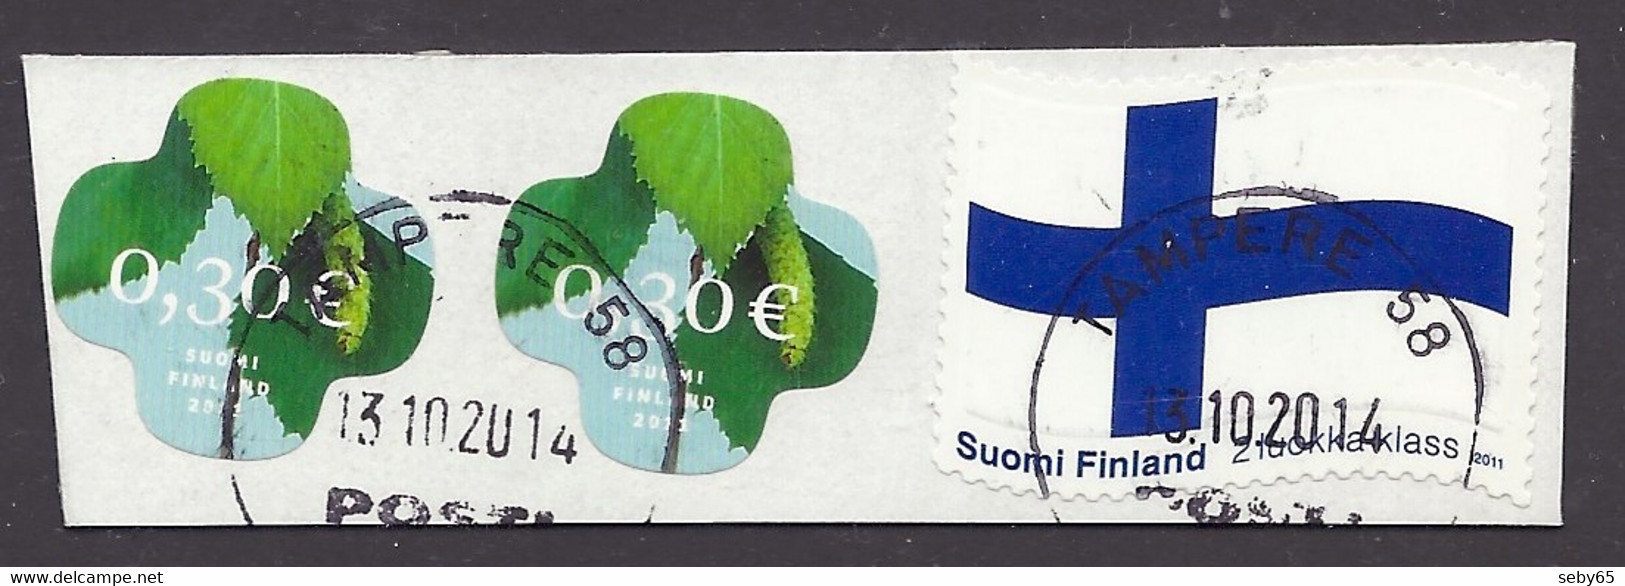 Finland 2011 - Flag, Flags, Drapeau, Nature Leaves, Self-adhesive On Paper Fragment - Used - Used Stamps